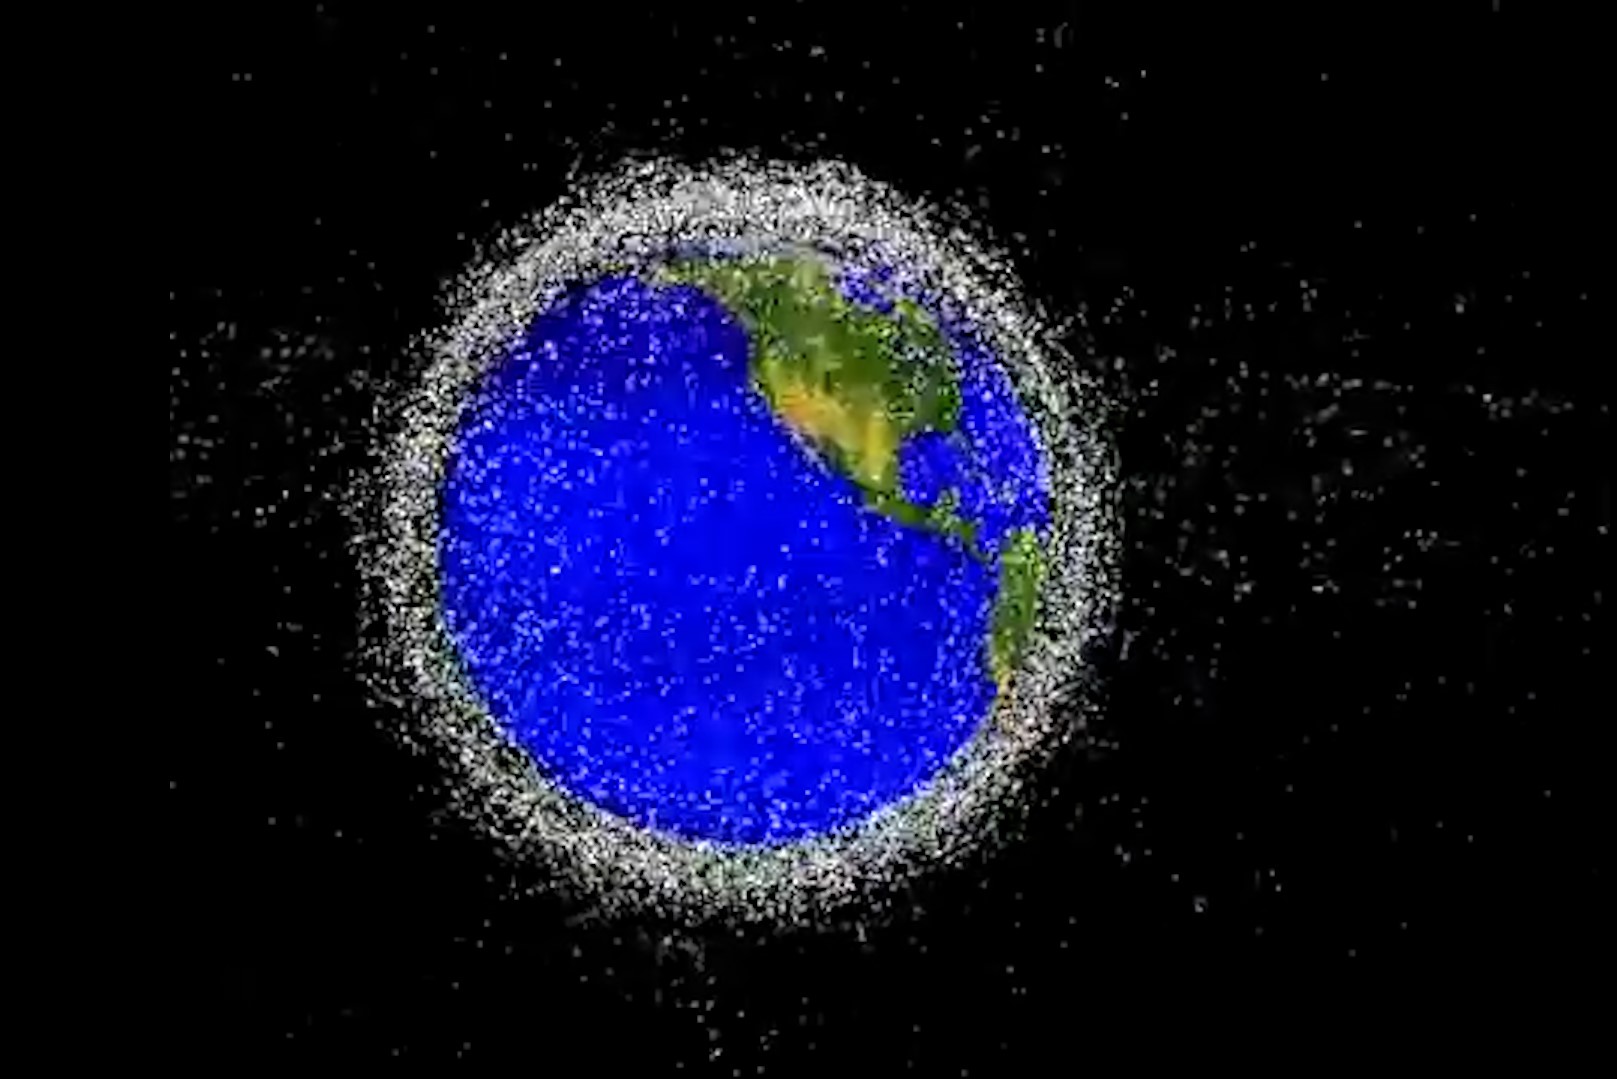 An image of satellites and debris orbiting the earth